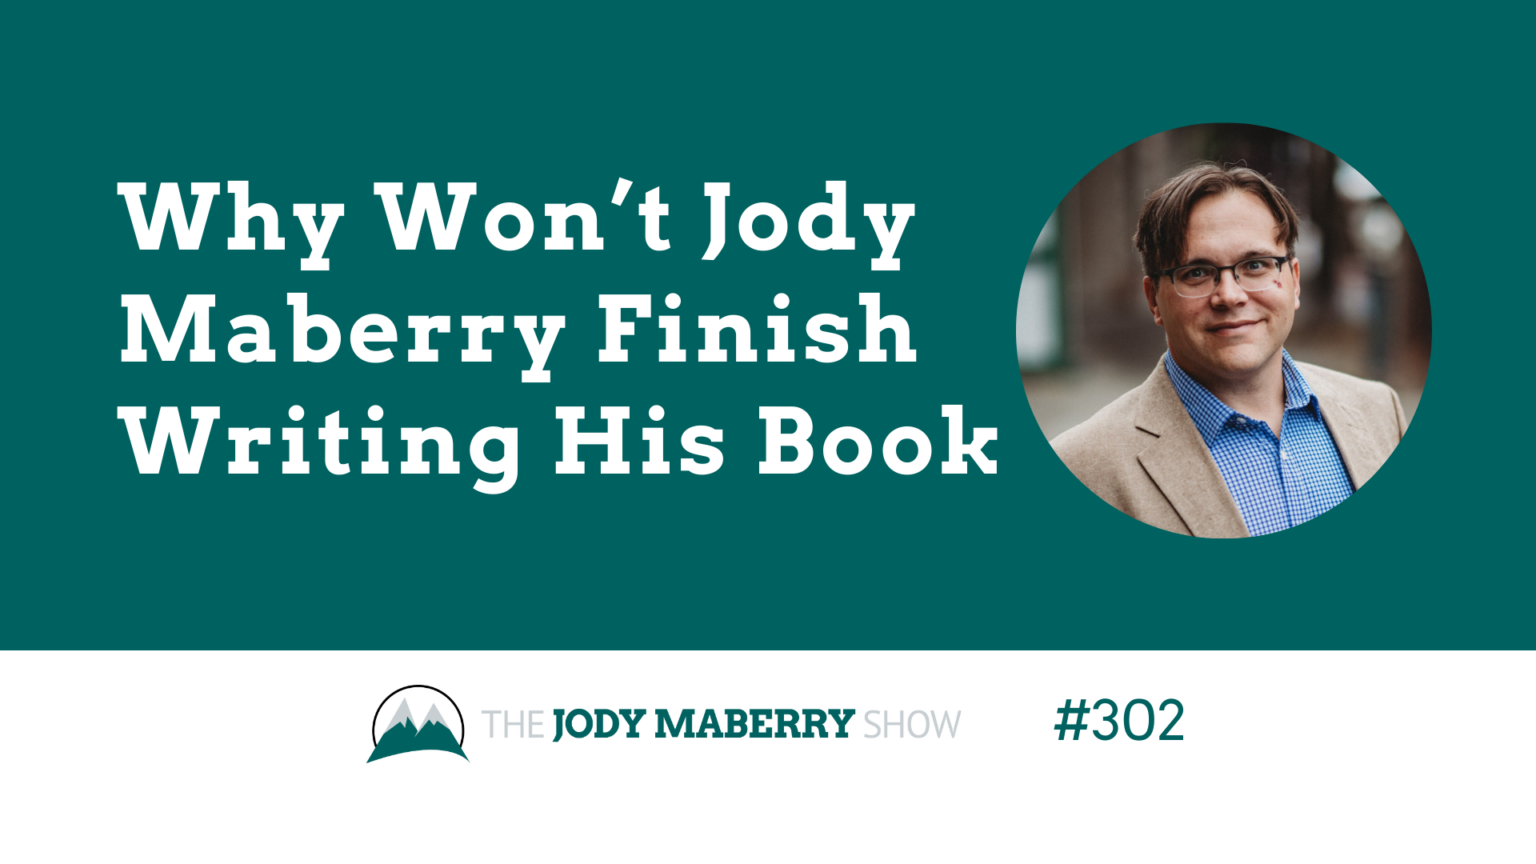 Jody Maberry Show Episode 302 Why Wont Jody Maberry Finish Writing His Book